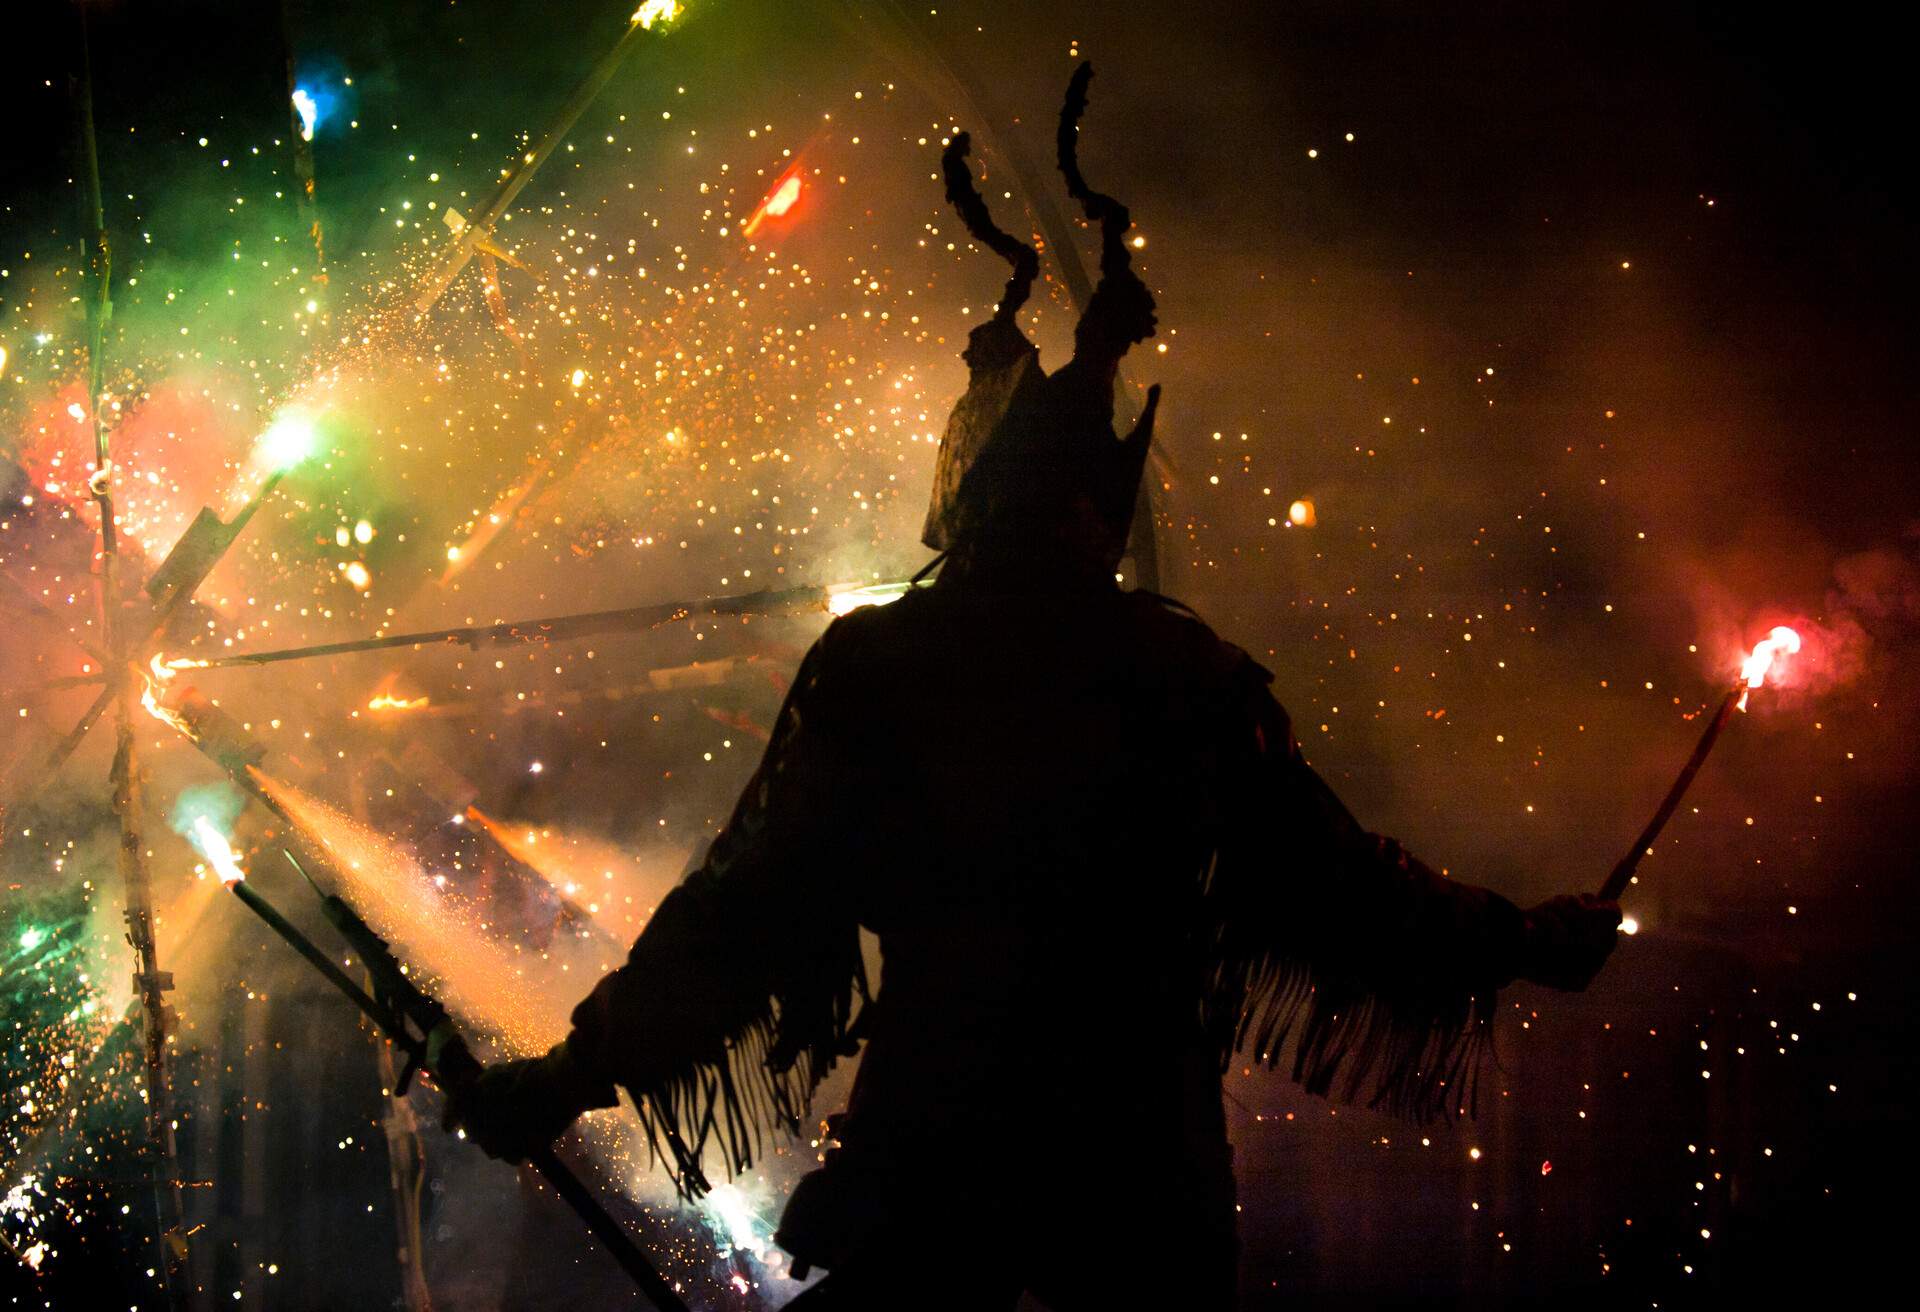 A silhouette of a person in a costume with horns standing in front of the colourful fireworks.